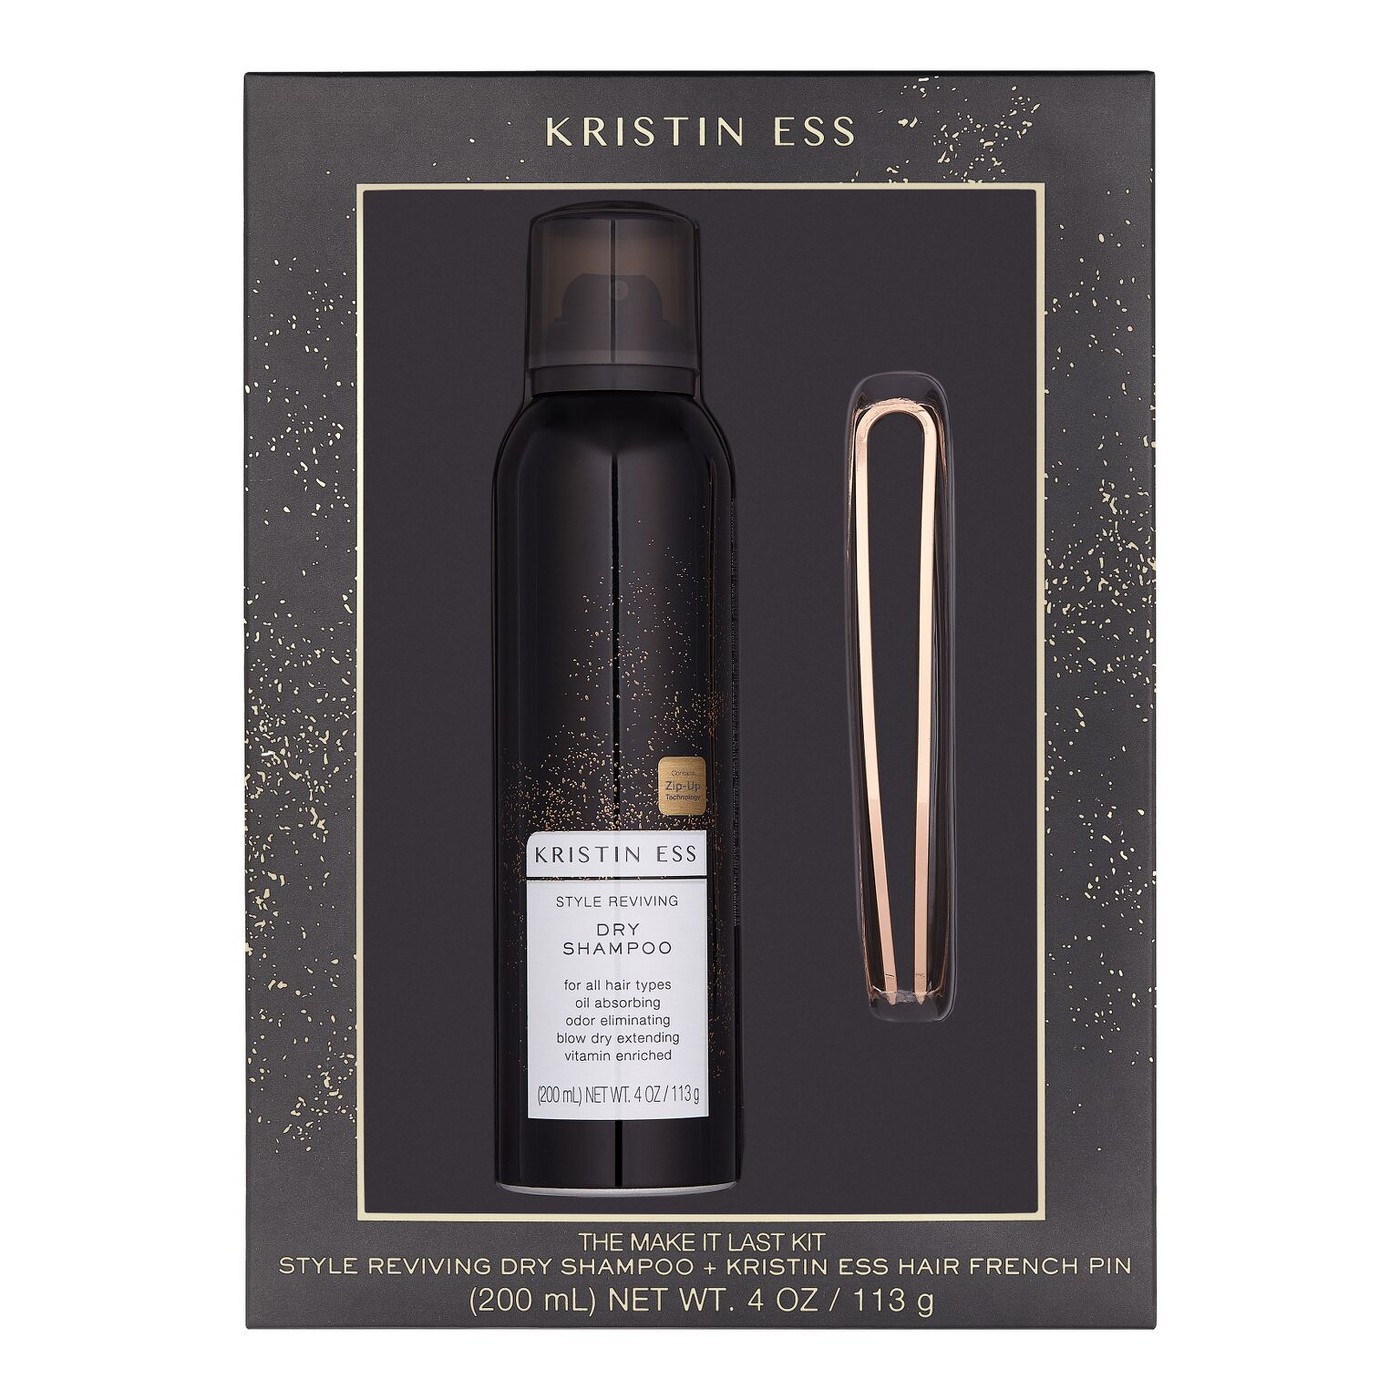 Kristin Ess Style Reviving Dry Shampoo + Hair French Pin - 4oz - image 1 of 1